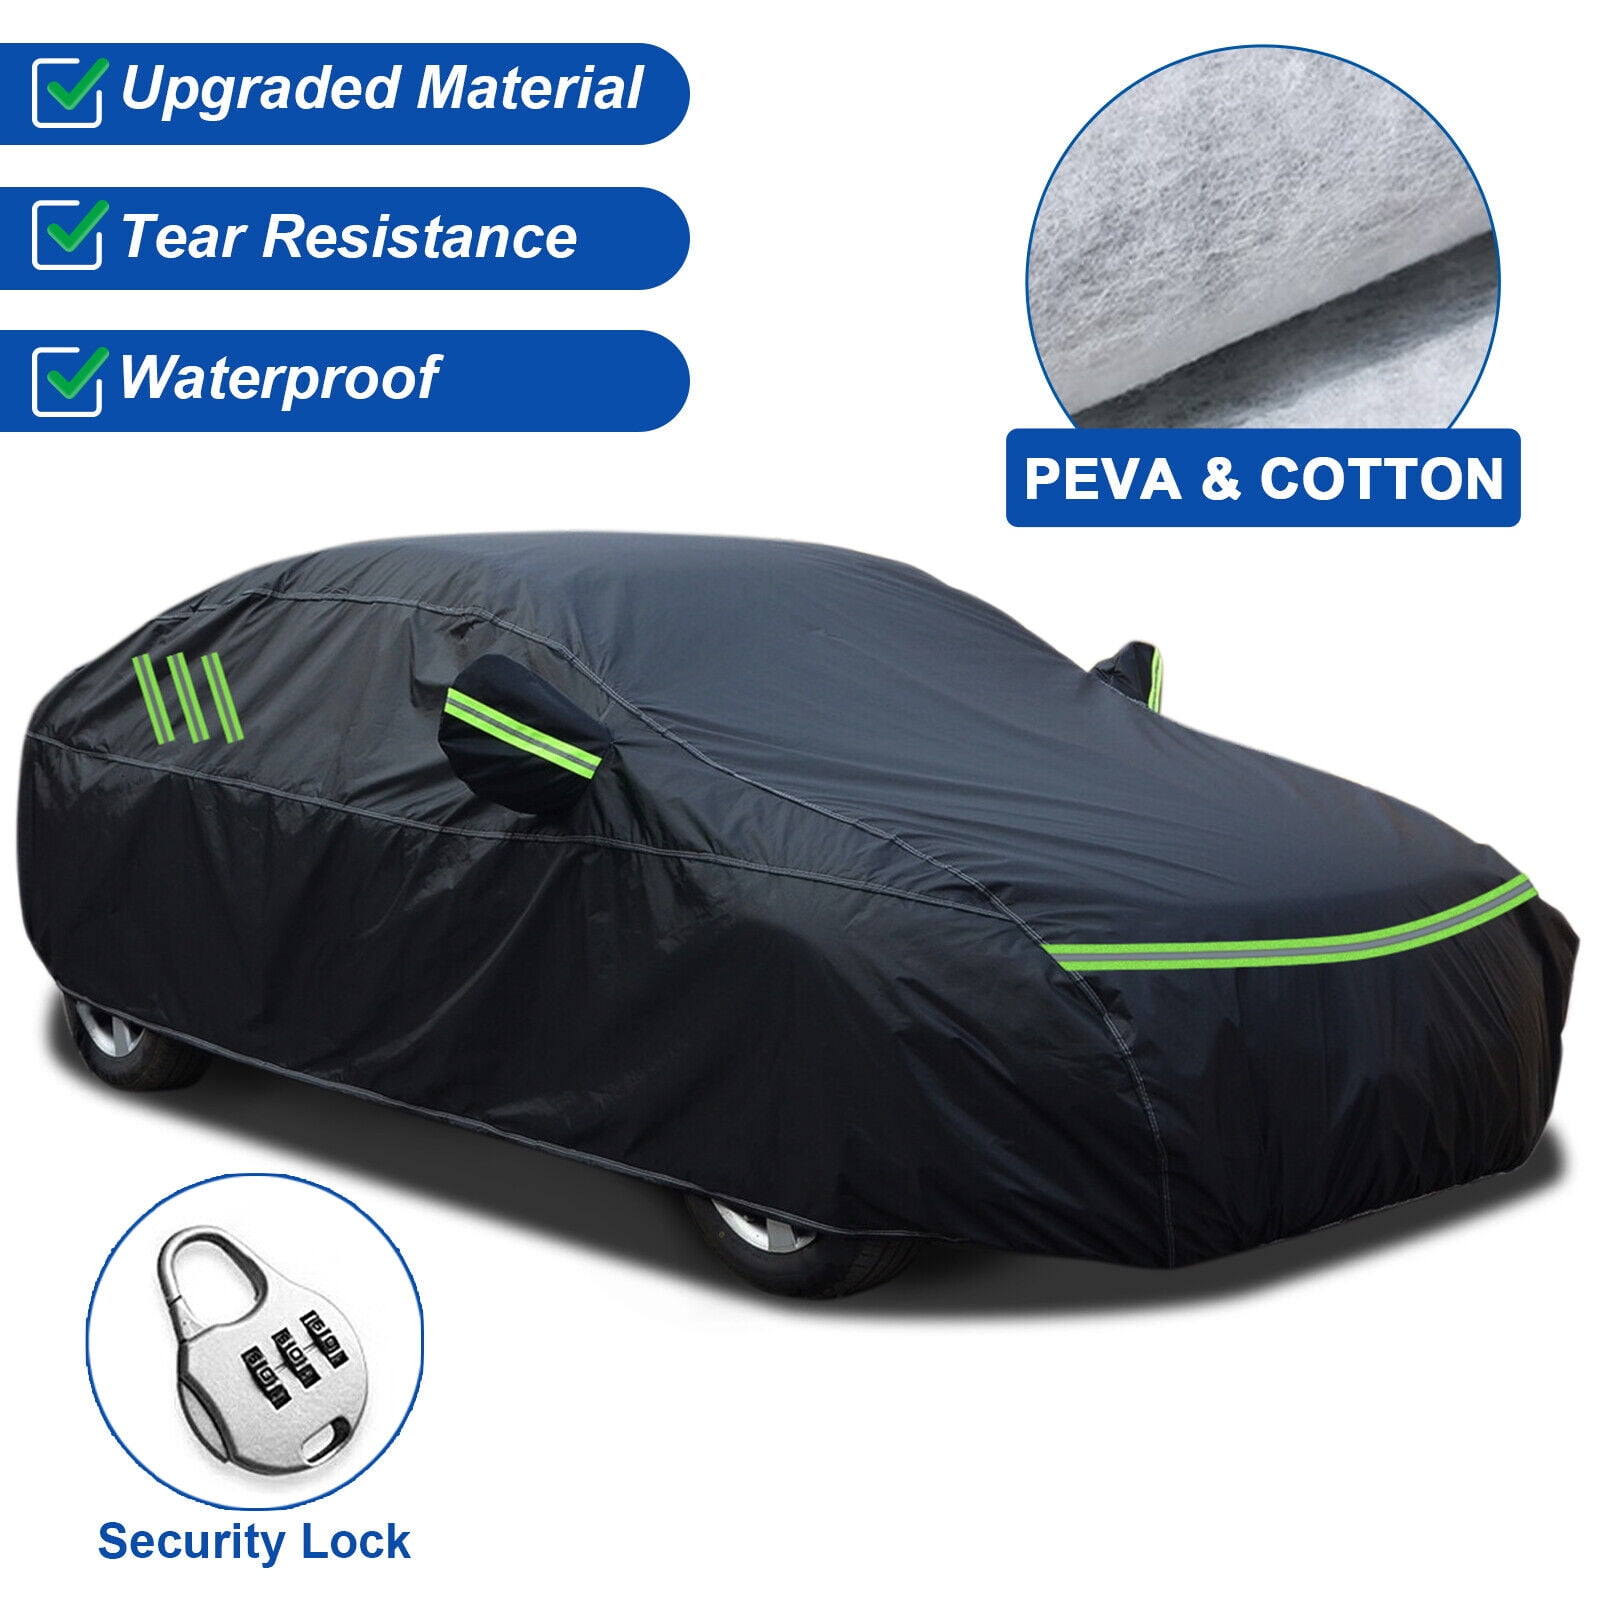 193 Sedan Car Cover Upgraded PEVA+Cotton Waterproof Full Automobiles Cover  with Security Lock Outdoor Indoor All Weather Snow Rain Sun Dust Protection  Black 